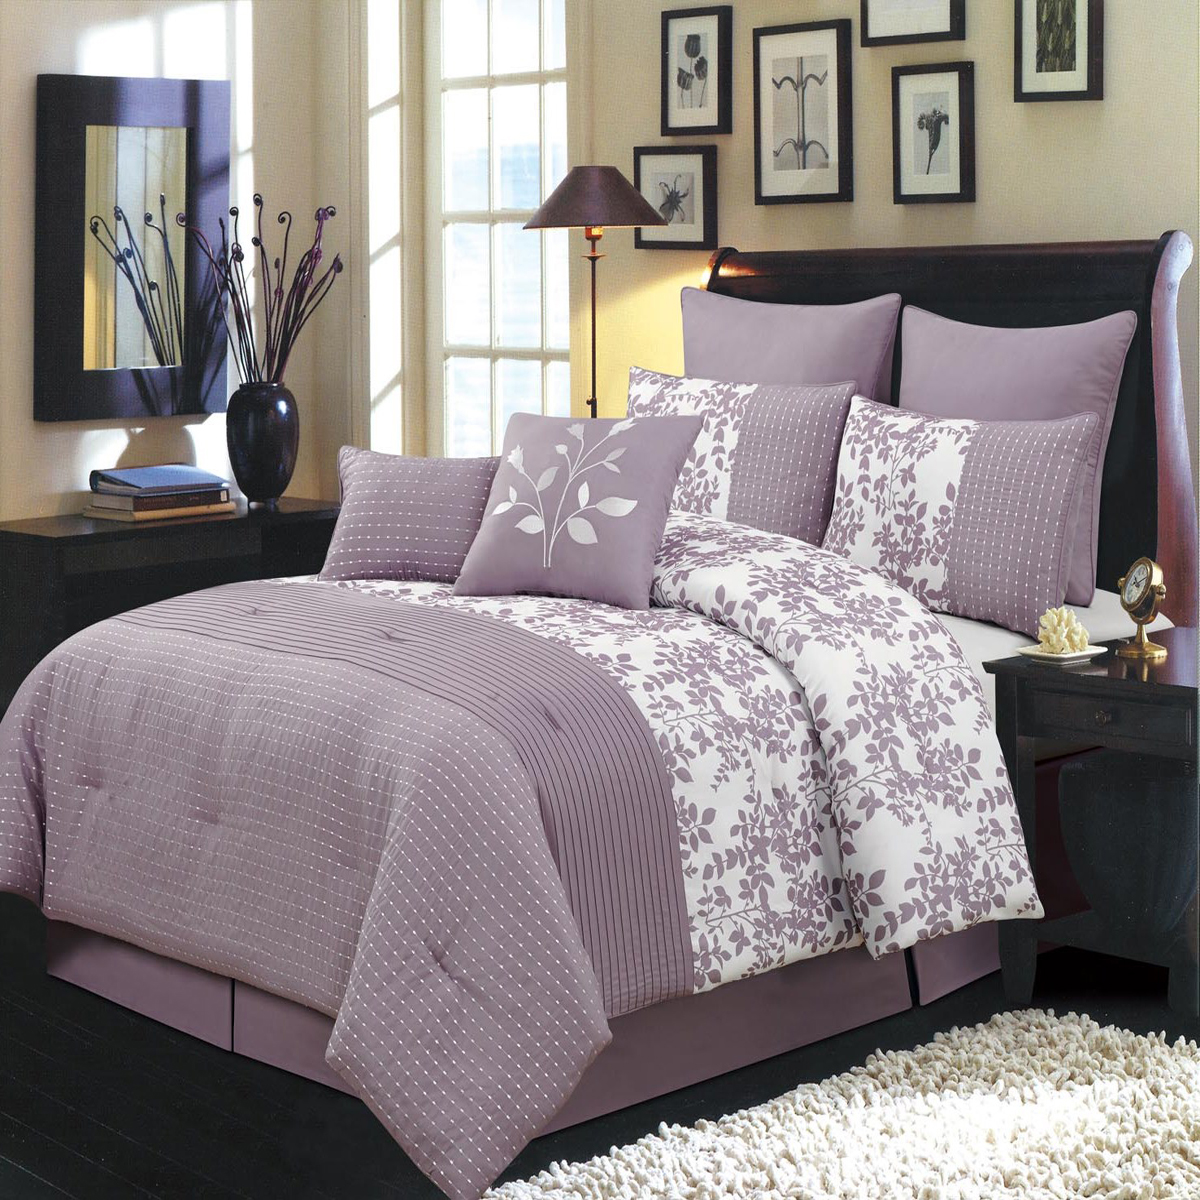 GoLinens Luxury Bliss 100% Polyester Purple and White Shades 8 PC Comforter set